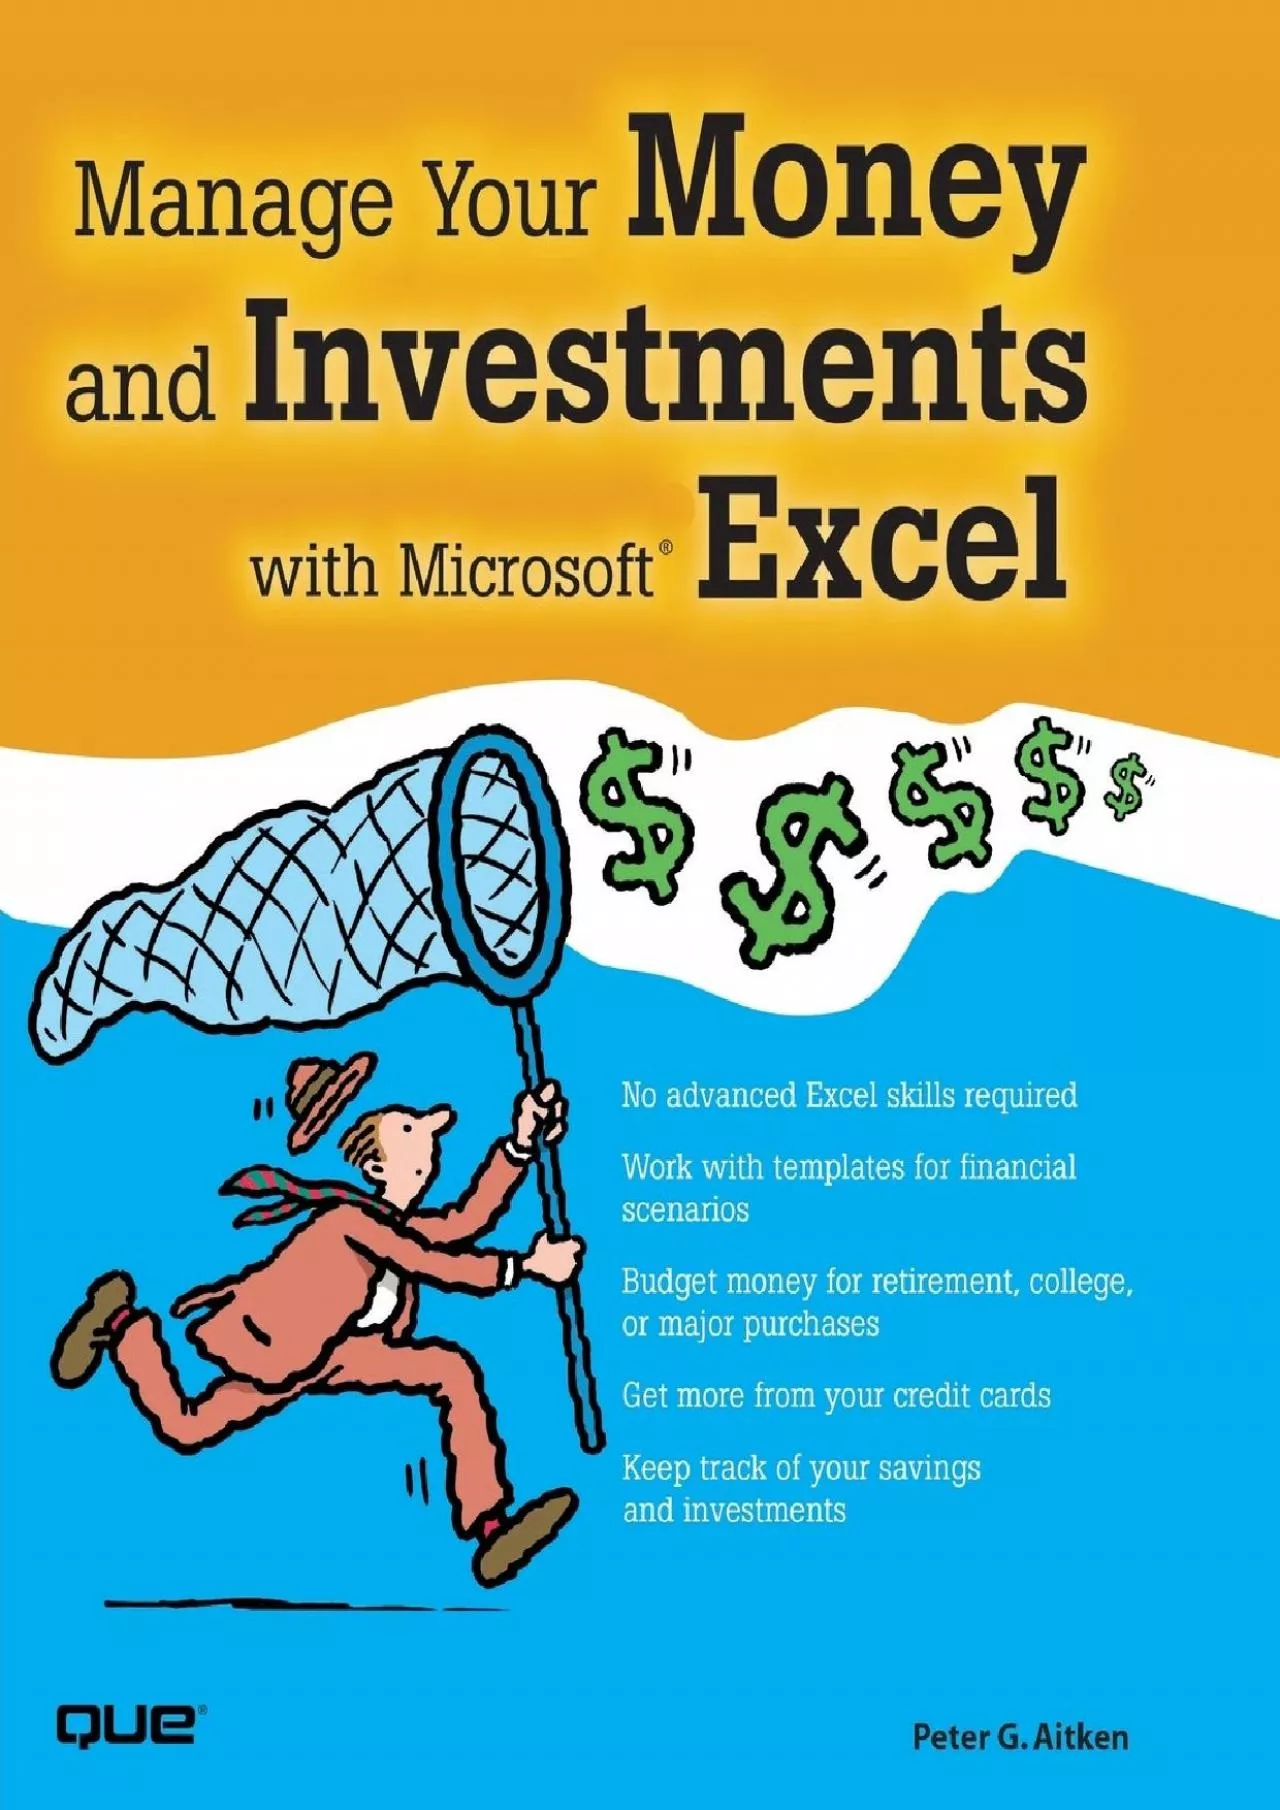 (EBOOK)-Manage Your Money And Investments With Microsoft Excel